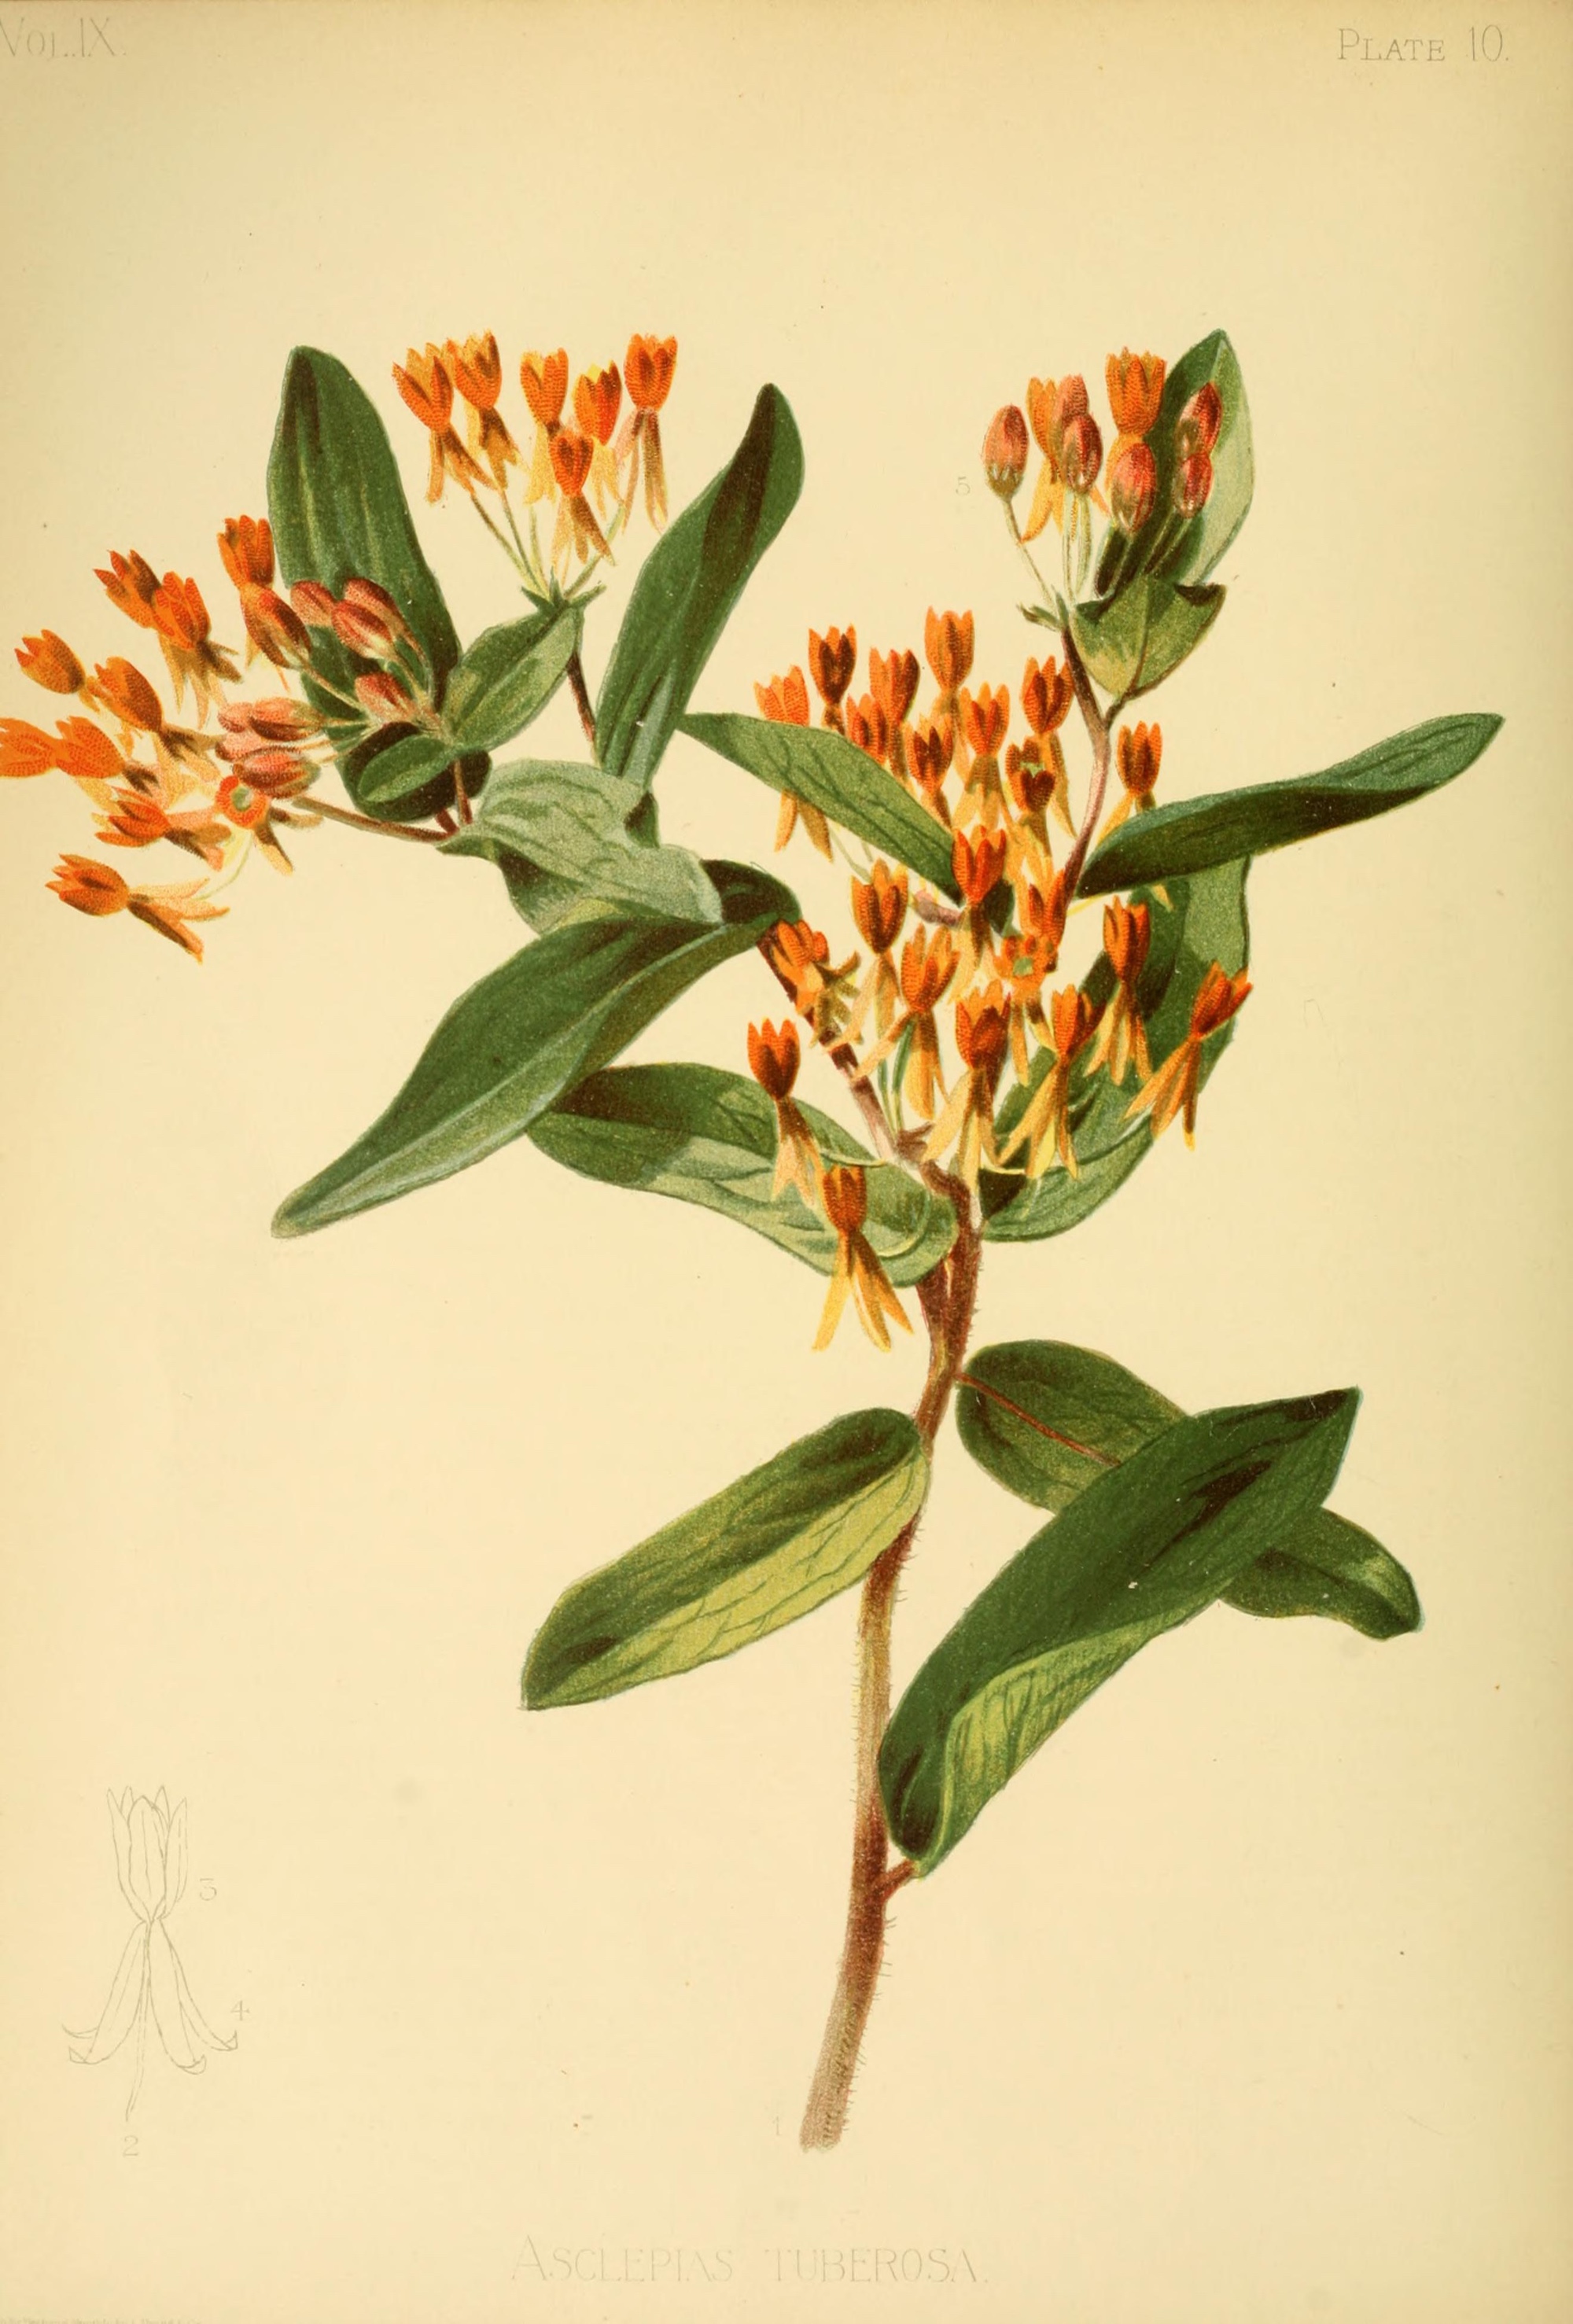  Butterfly-Weed  (Asclepias tuberosa) illustration circa 1899.